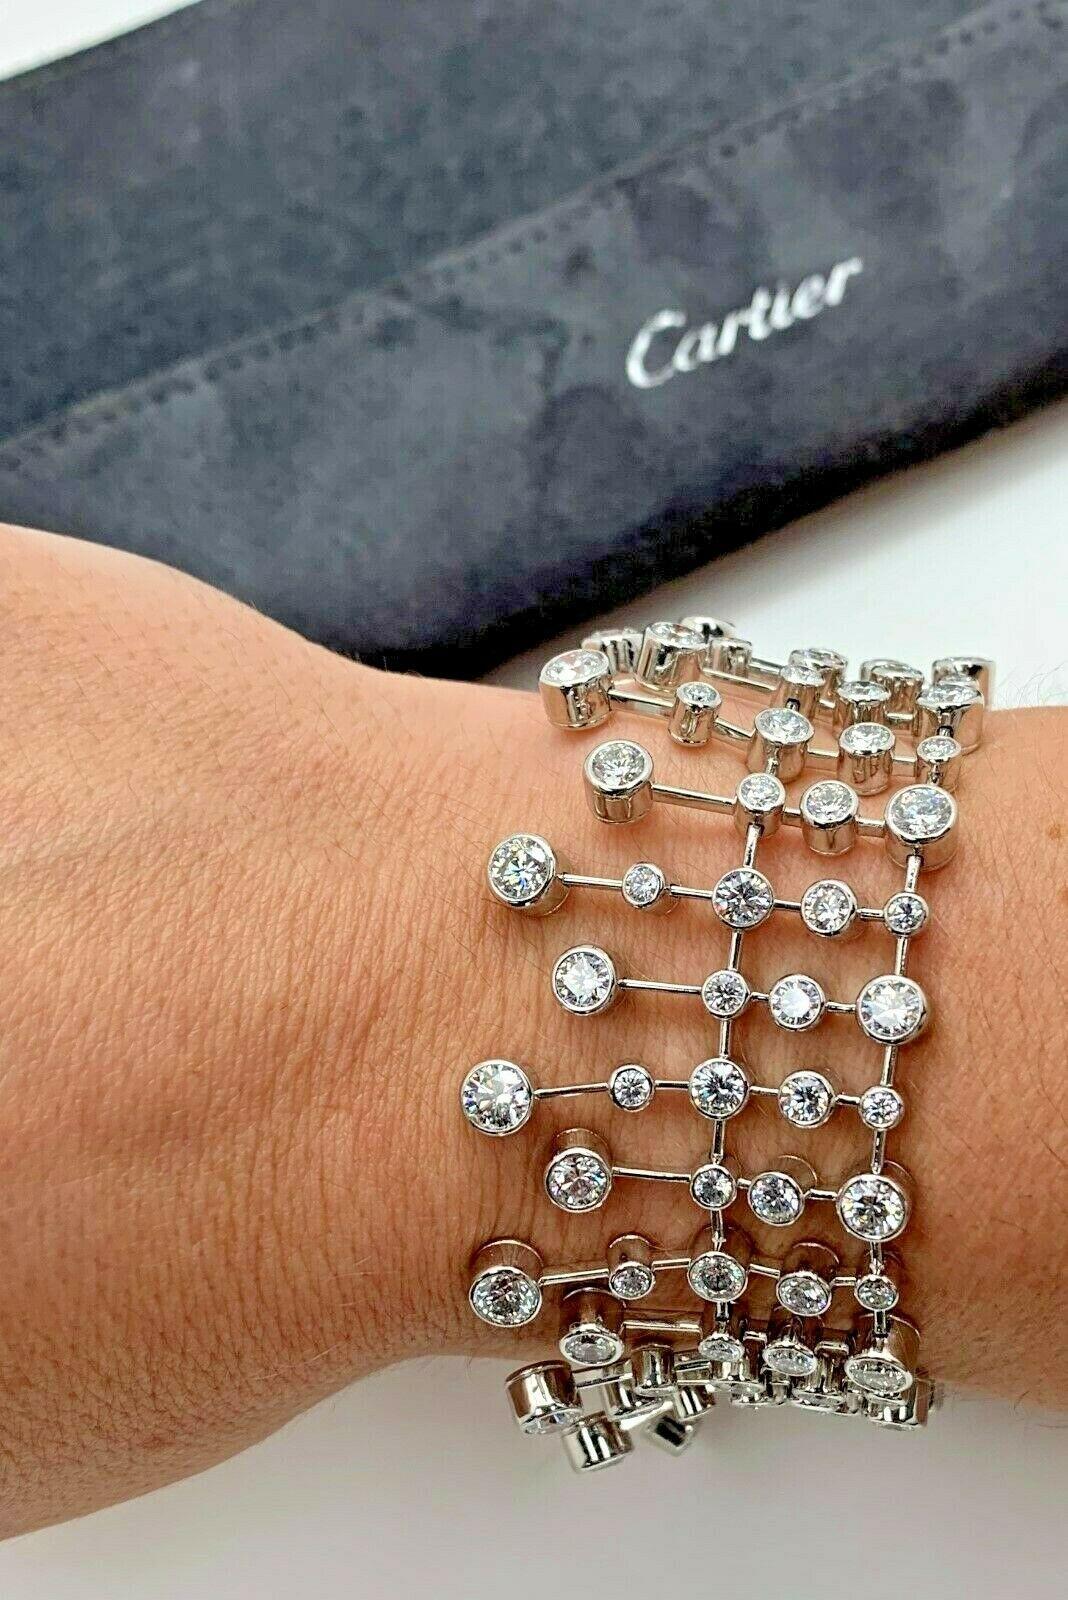 A magnificent Cartier diamond tennis bracelet showcasing 126 of the finest round brilliant cut diamonds set in platinum, the bracelet features a draping and is incredibly comfortable to wear. The bracelet has a total weight of 20.04 cts, and